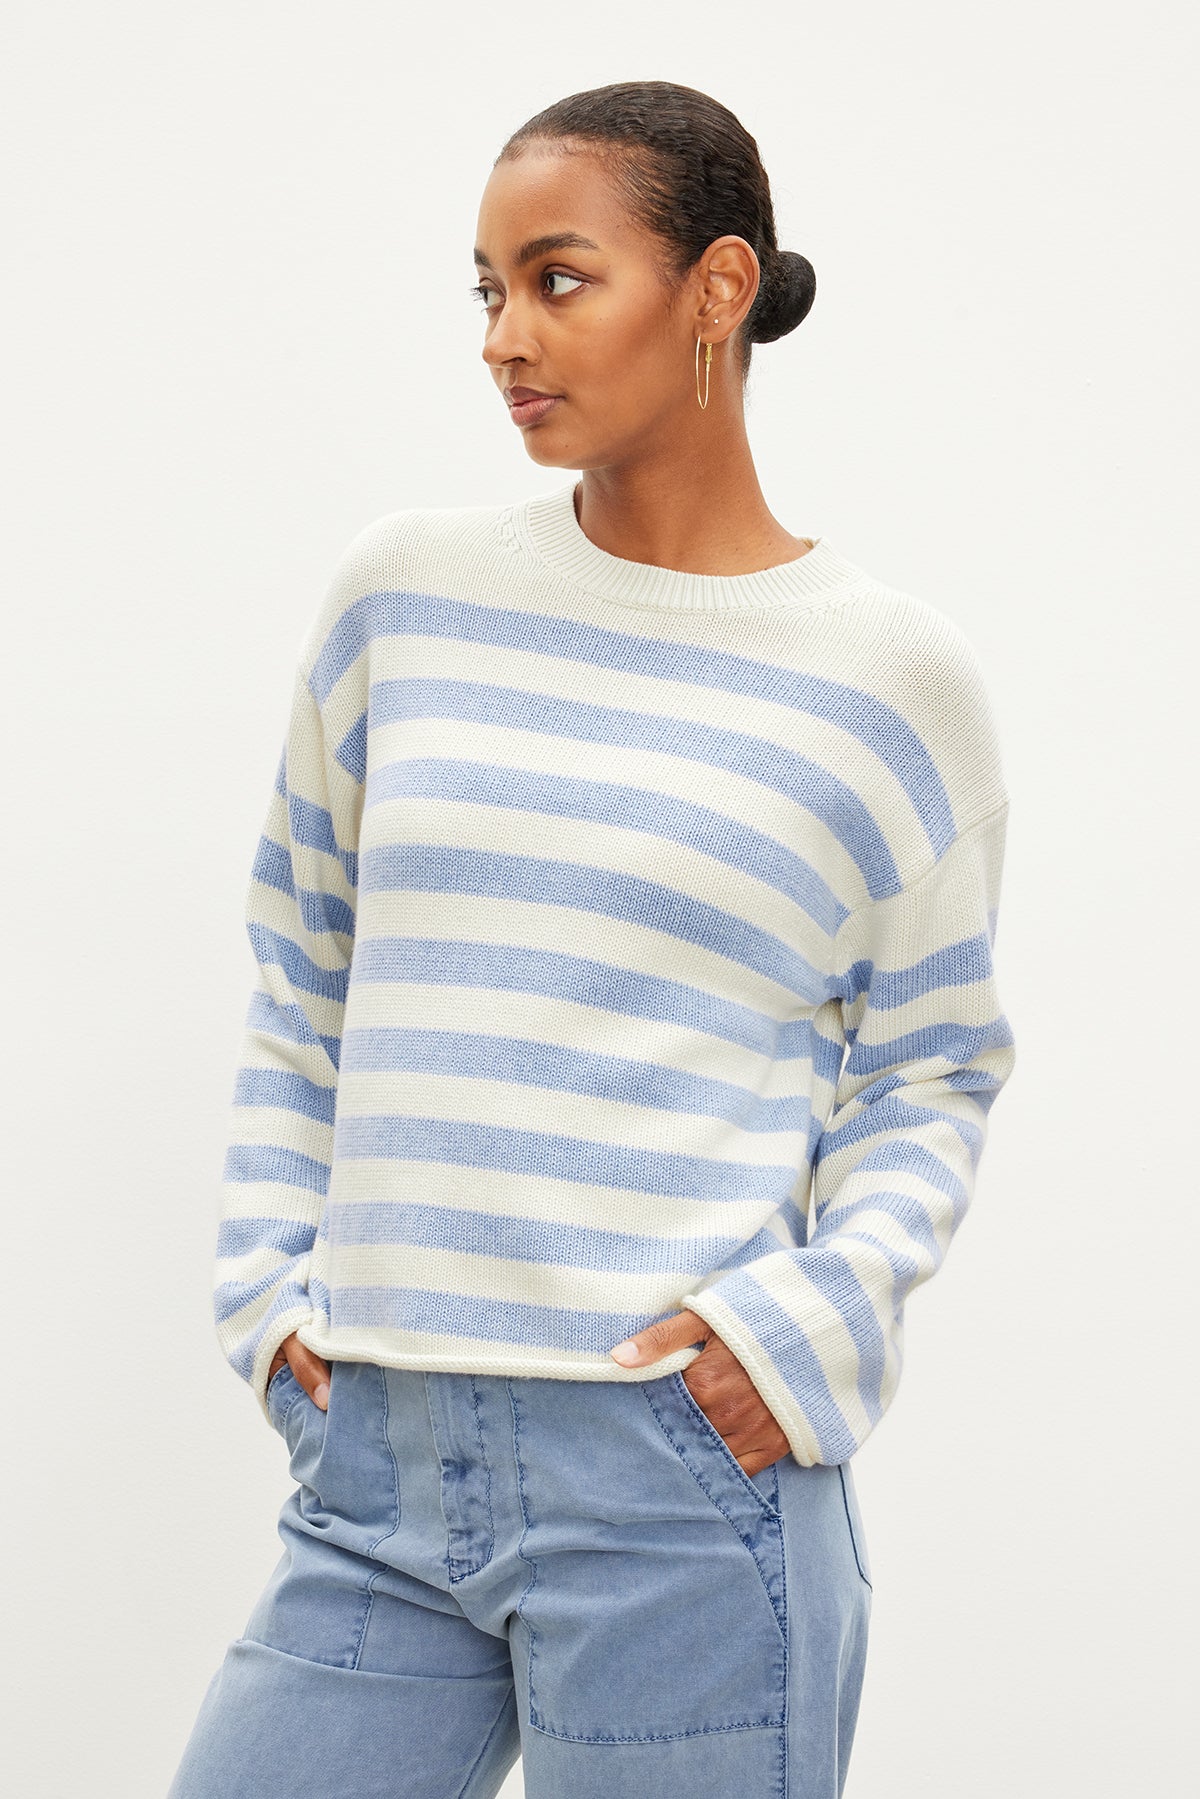 The model is wearing a Velvet by Graham & Spencer LEX STRIPED CREW NECK SWEATER.-35967621726401